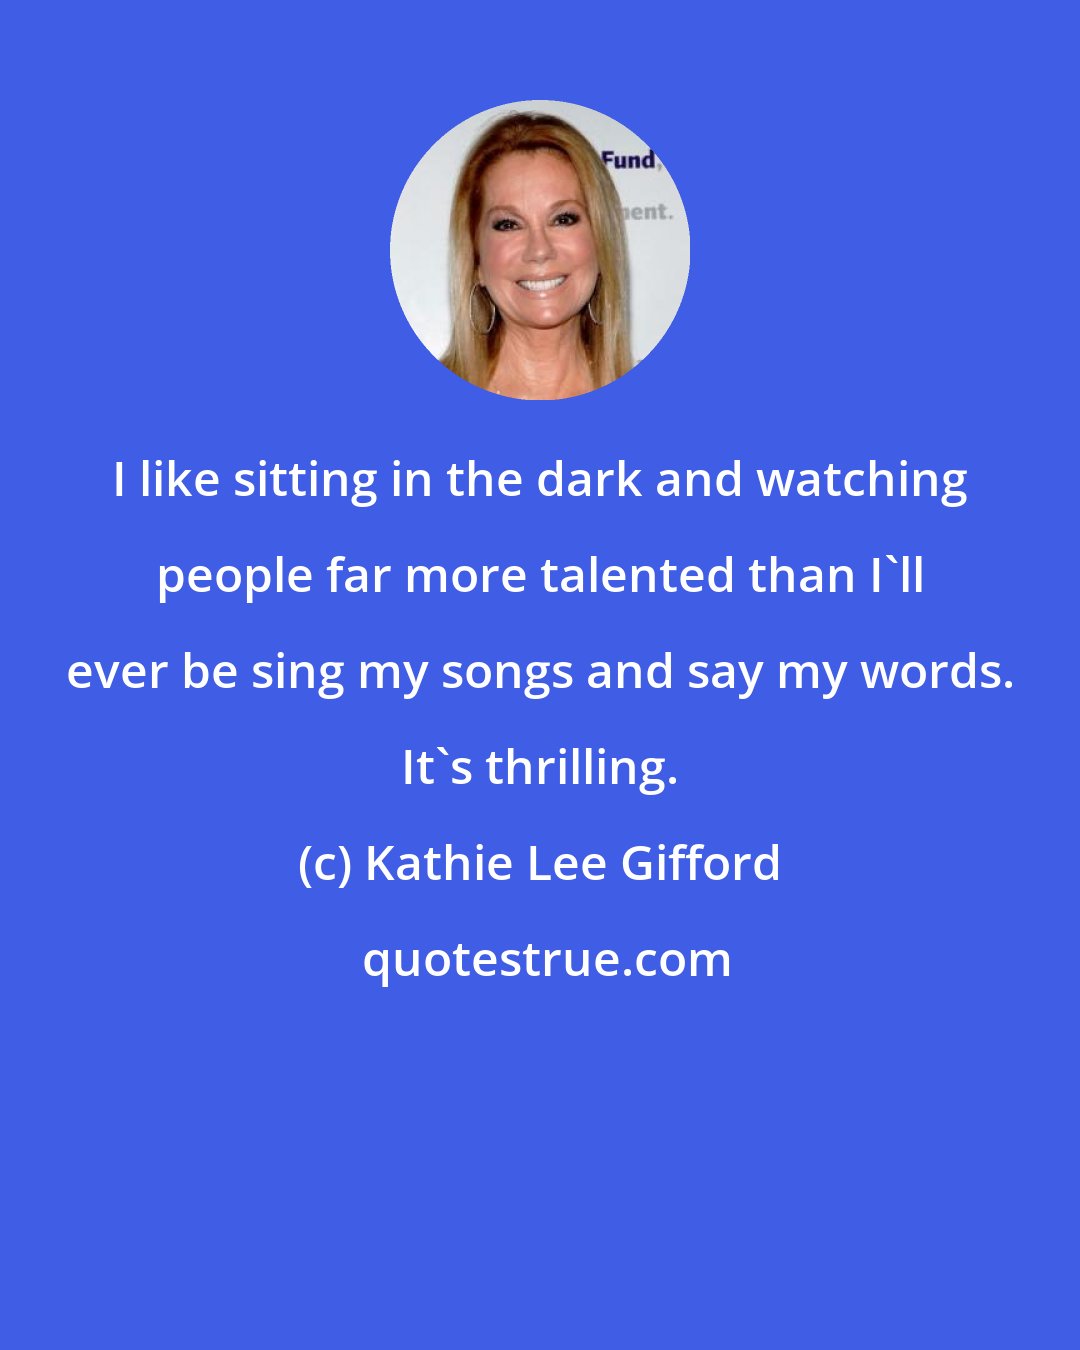 Kathie Lee Gifford: I like sitting in the dark and watching people far more talented than I'll ever be sing my songs and say my words. It's thrilling.